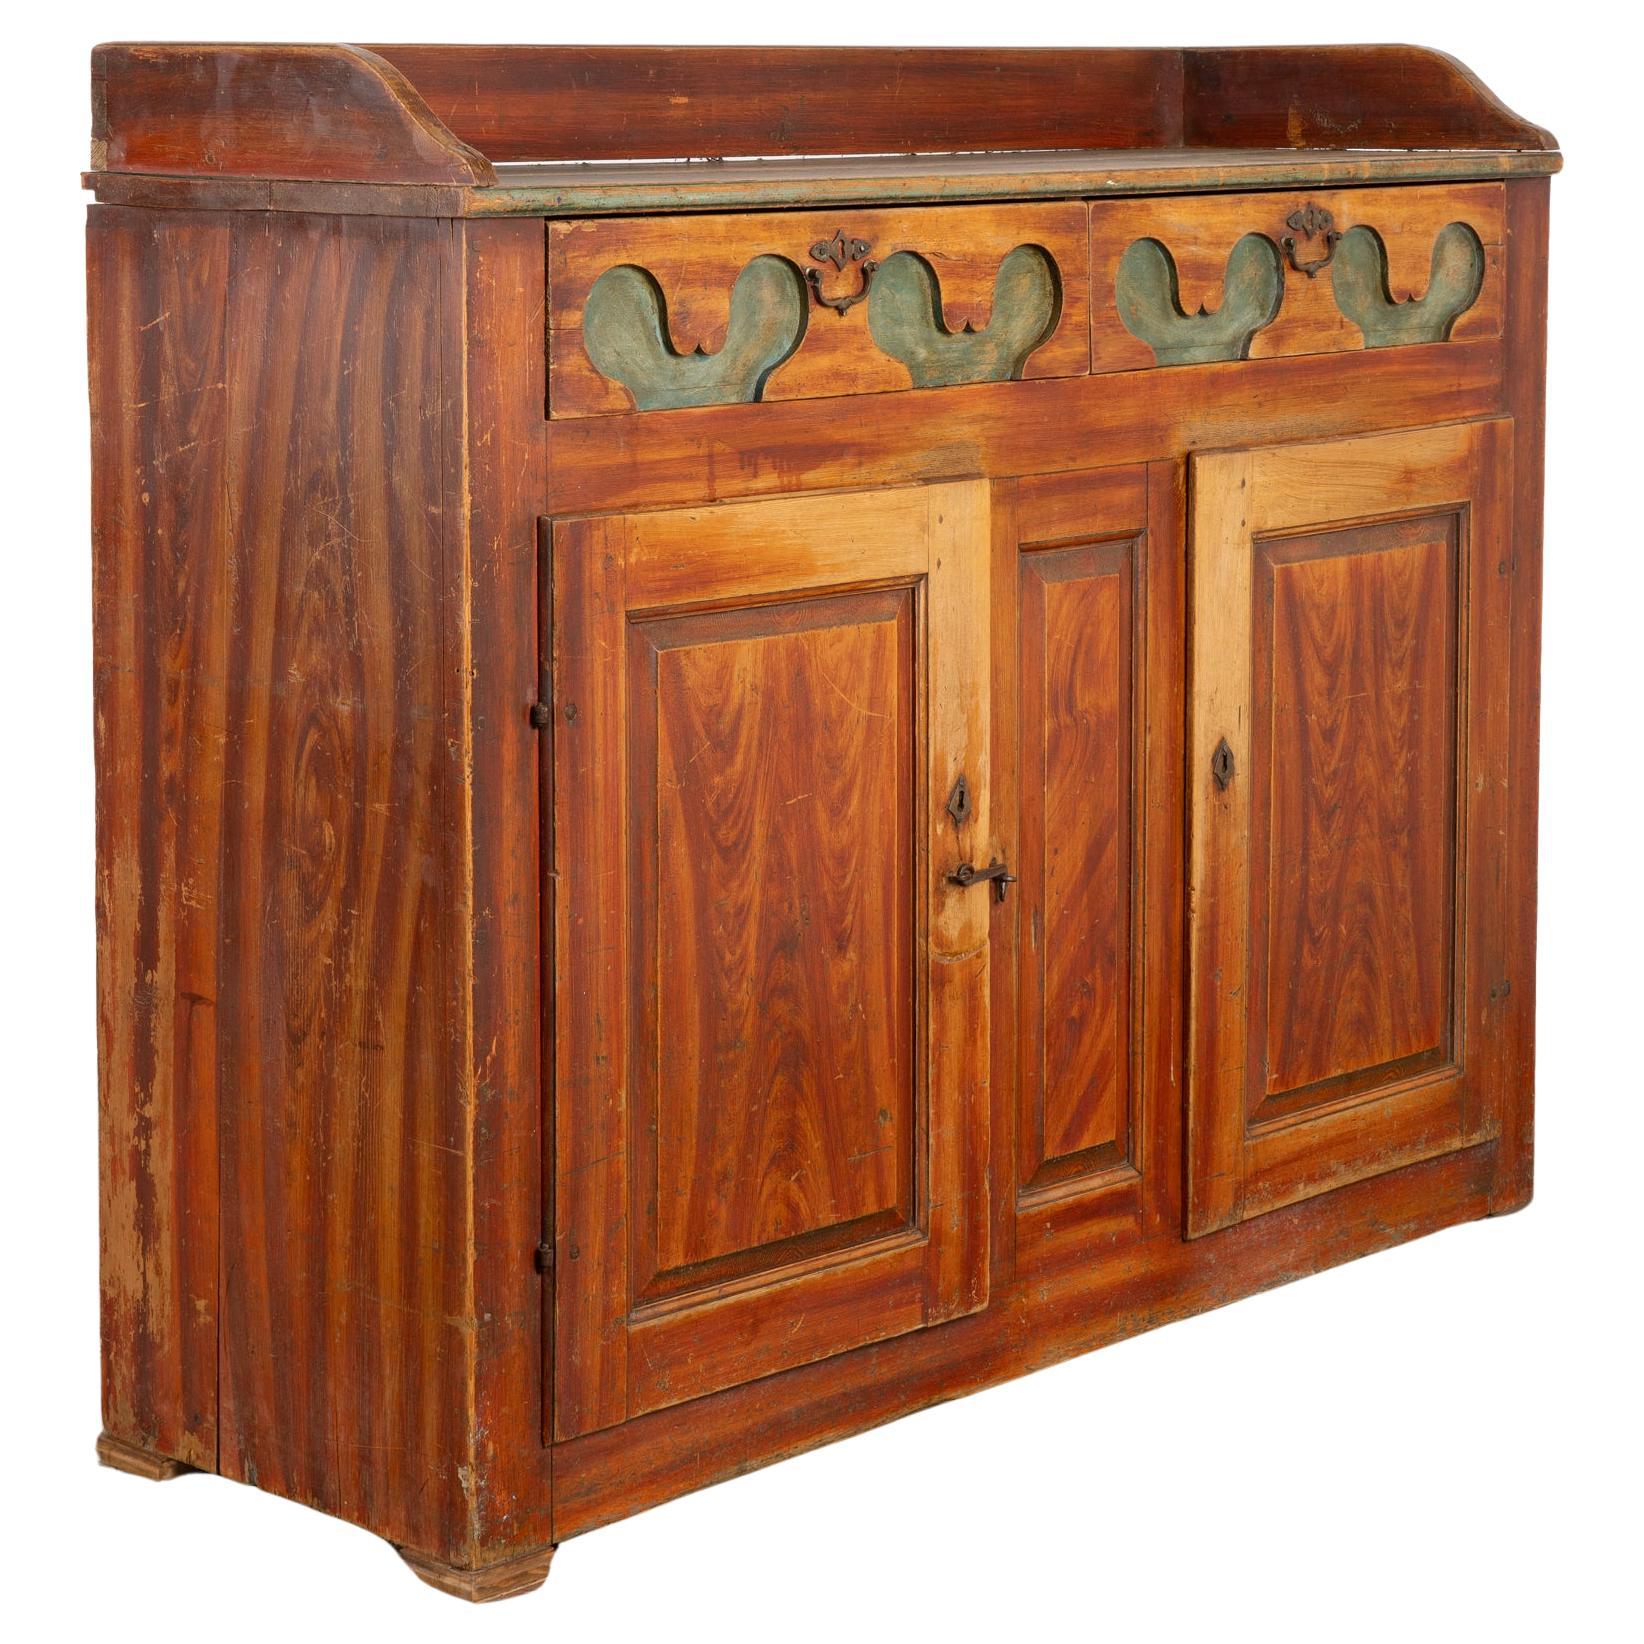 Original Painted Sideboard Cabinet from Sweden, circa 1820-40 For Sale